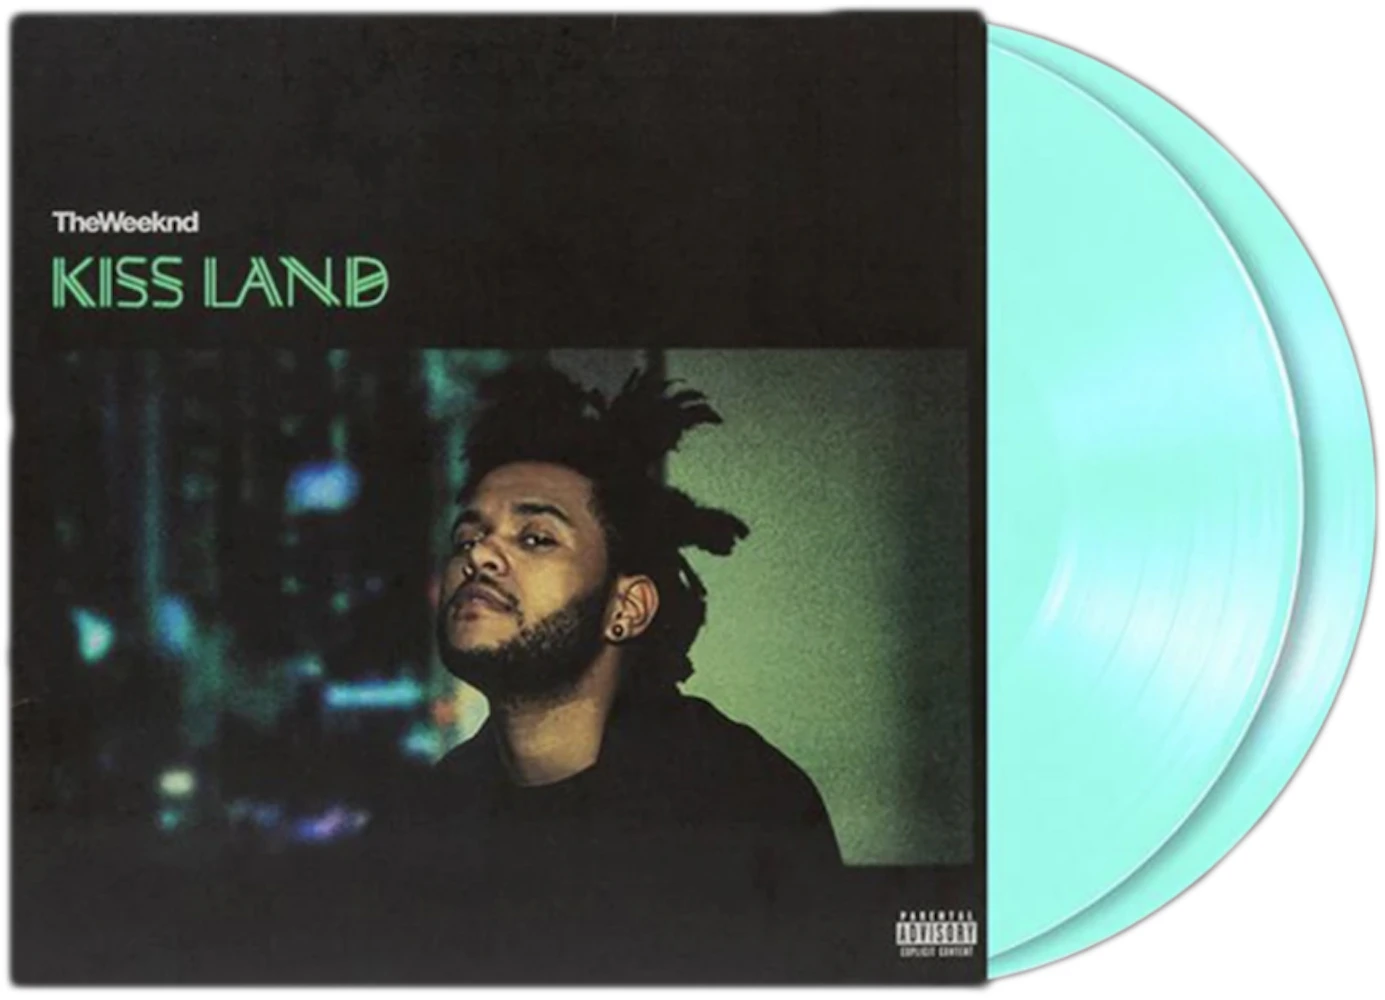 The Weeknd Kiss Land Limited Edition 2XLP Vinyl Seaglass - US